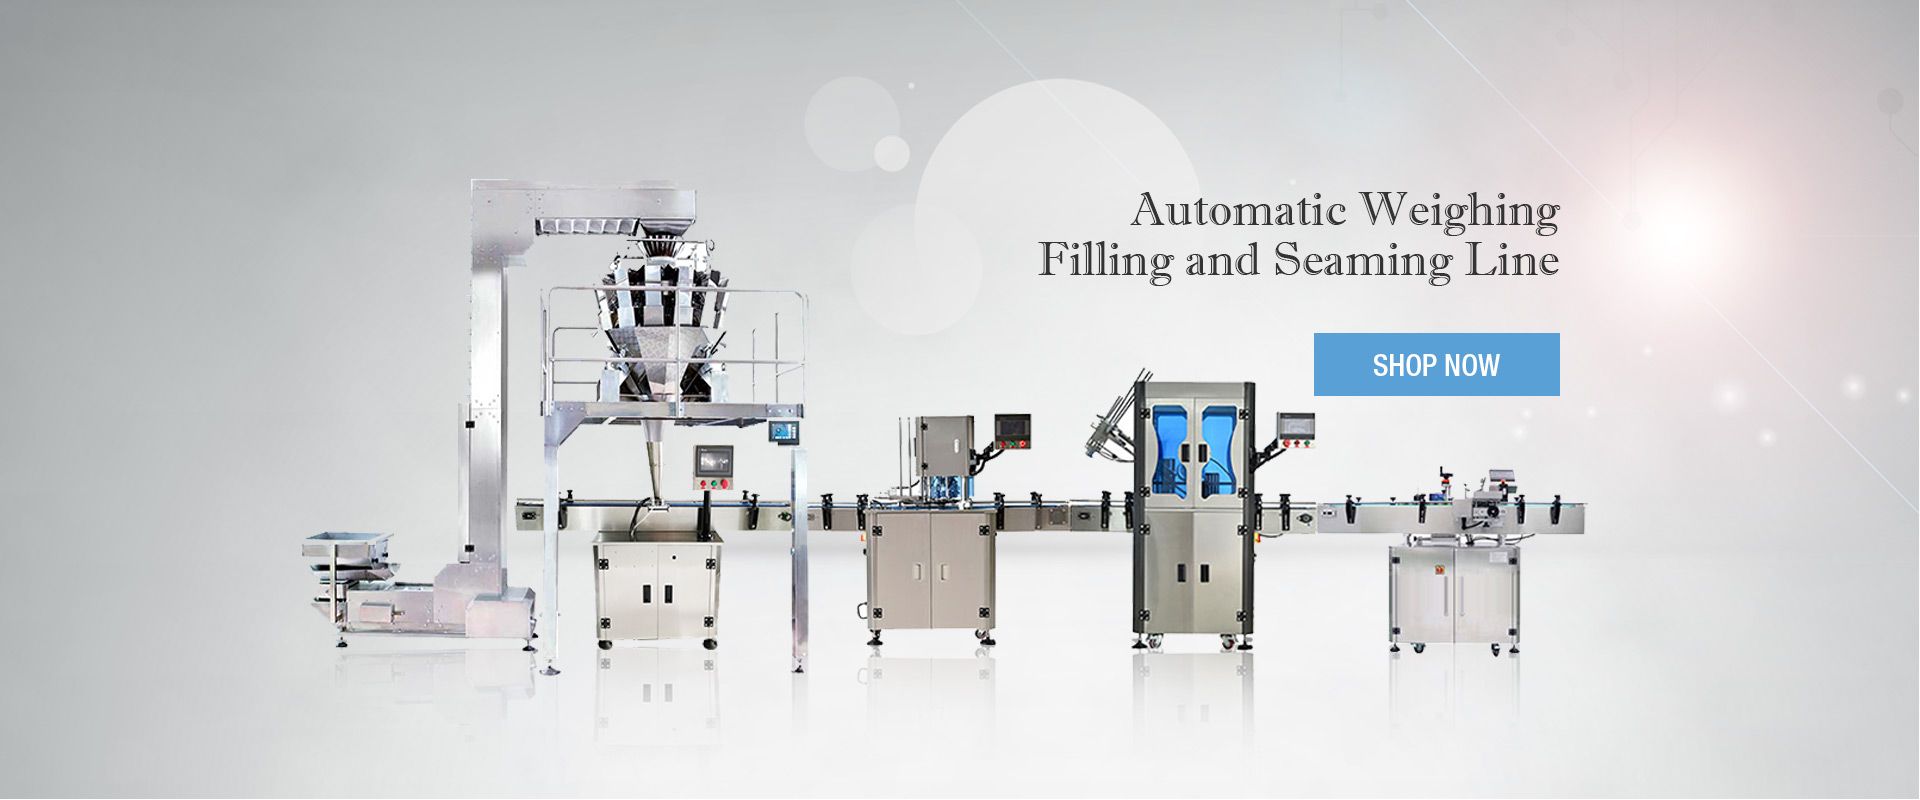 Automatic Weighing Filling and Seaming Line